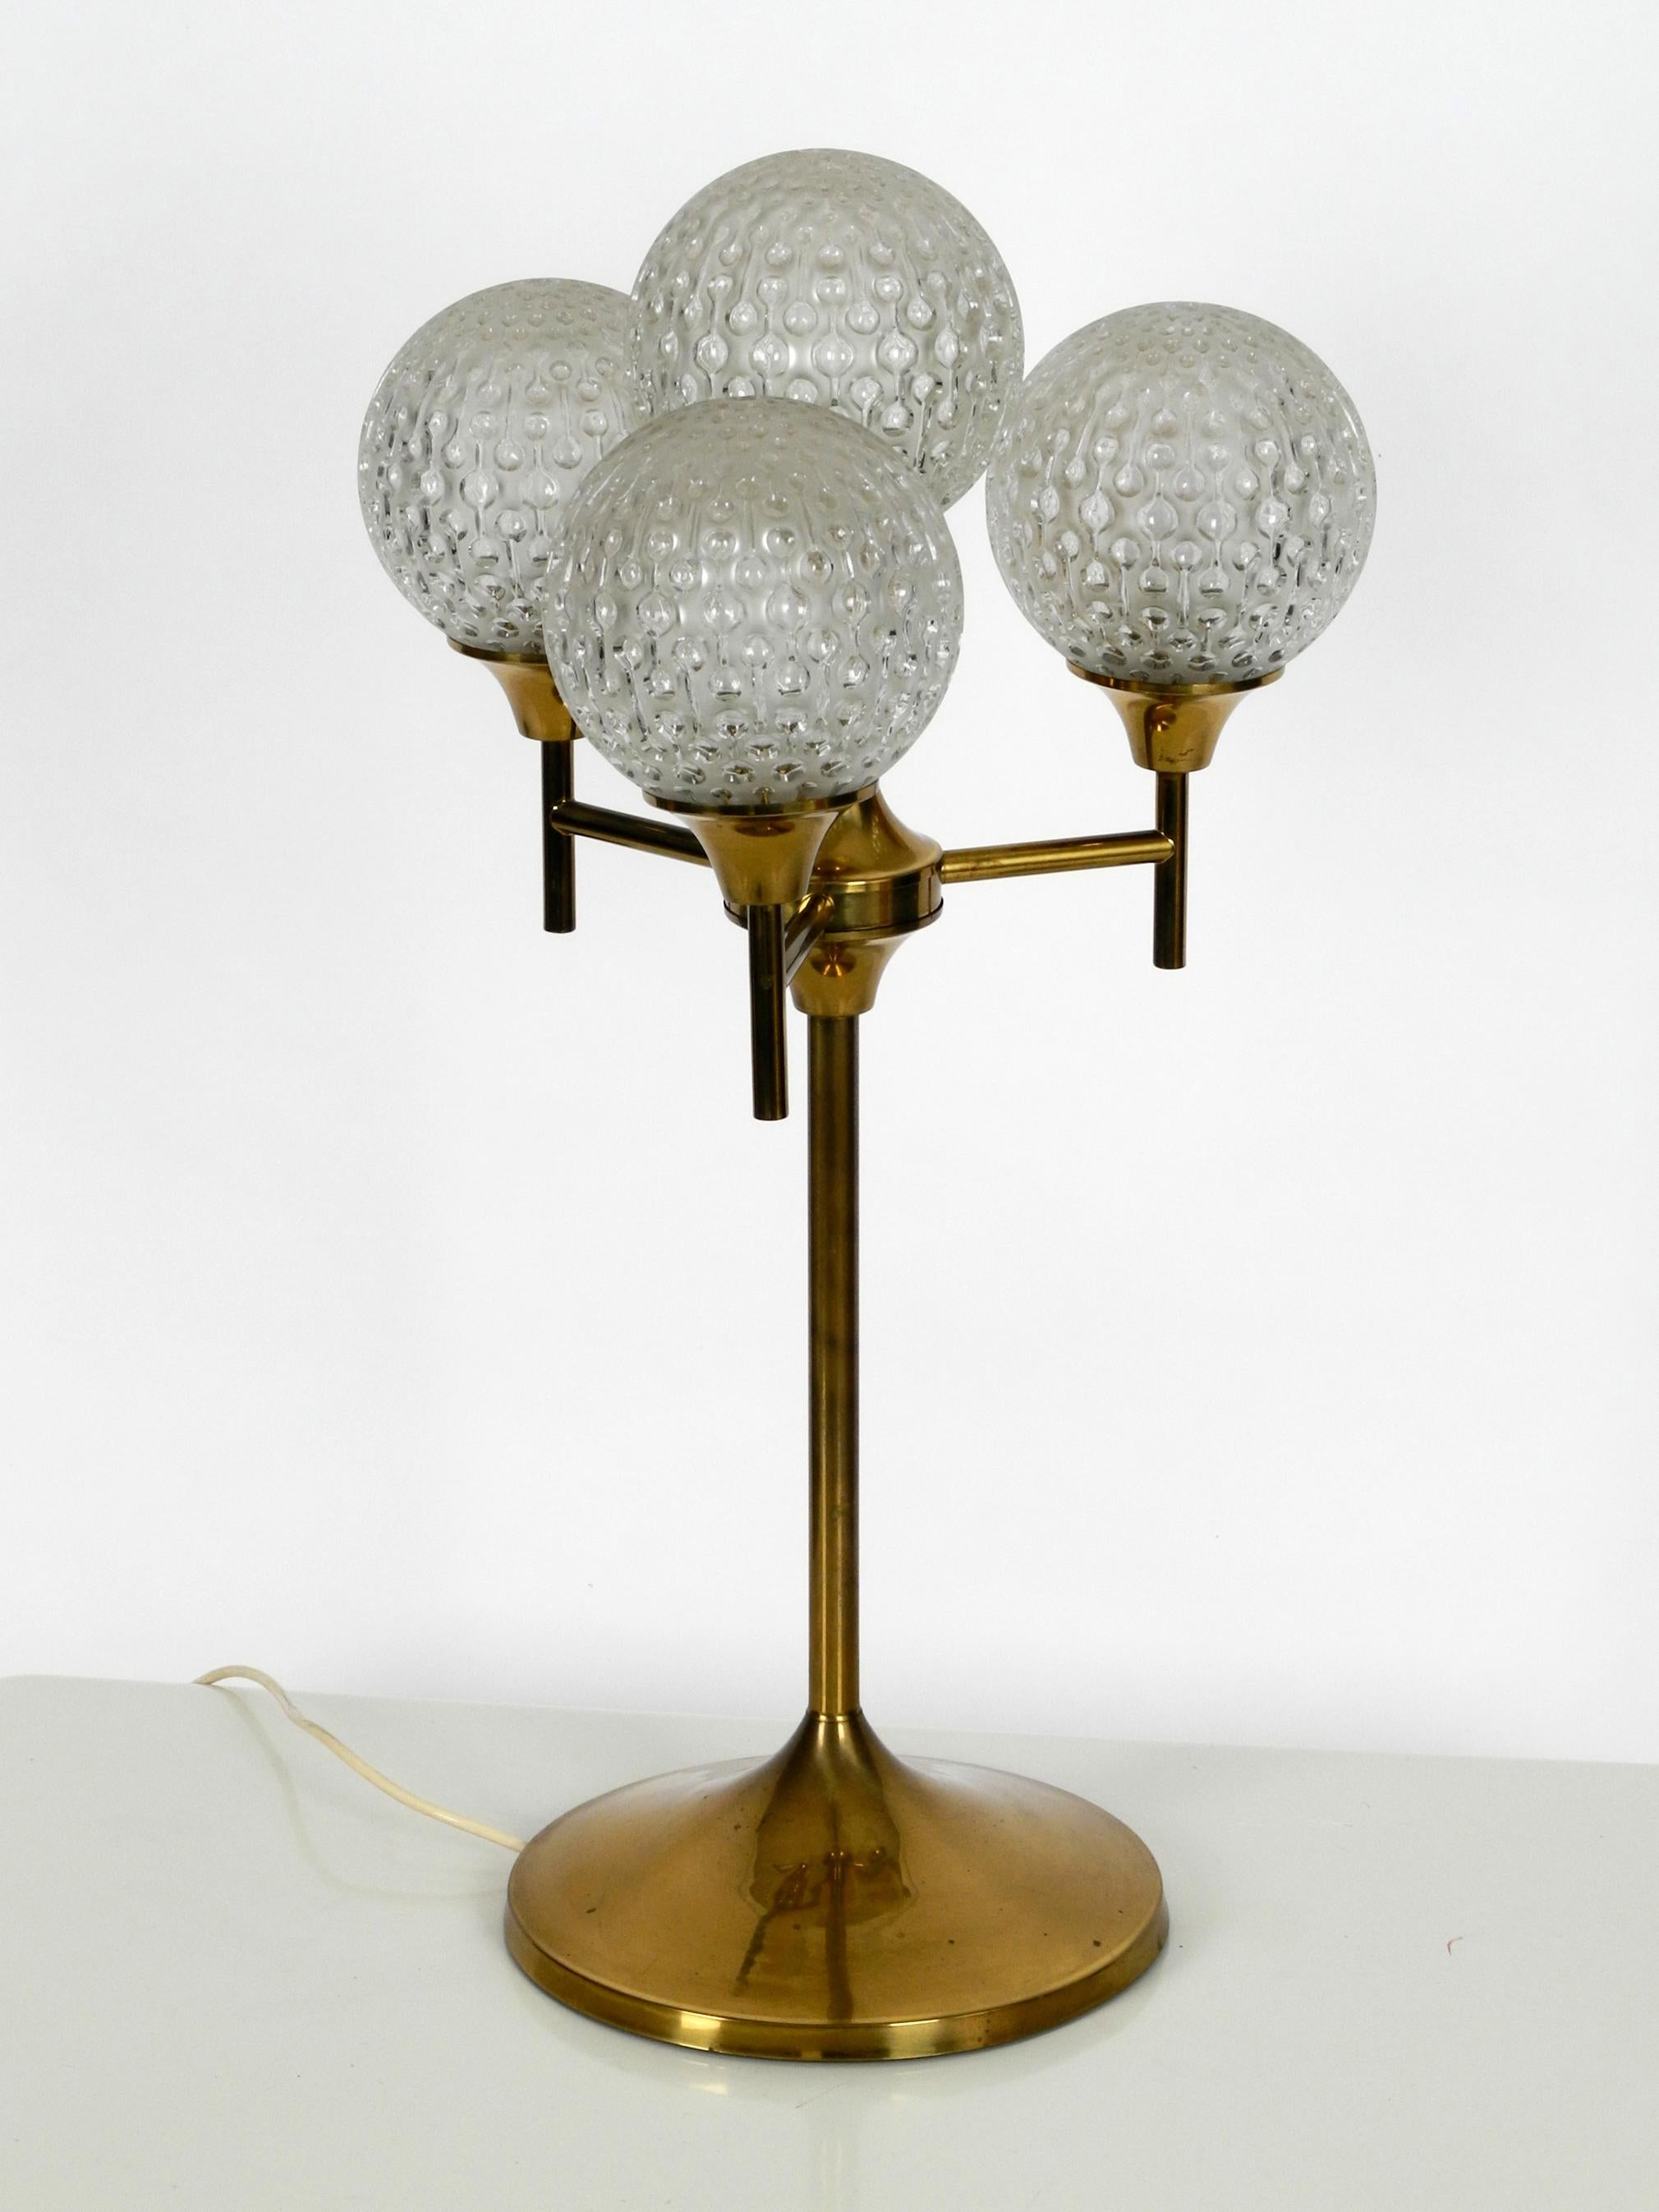 Space Age Exceptional Large 1960s Full Brass Table or Floor Lamp with 4 Glass Balls